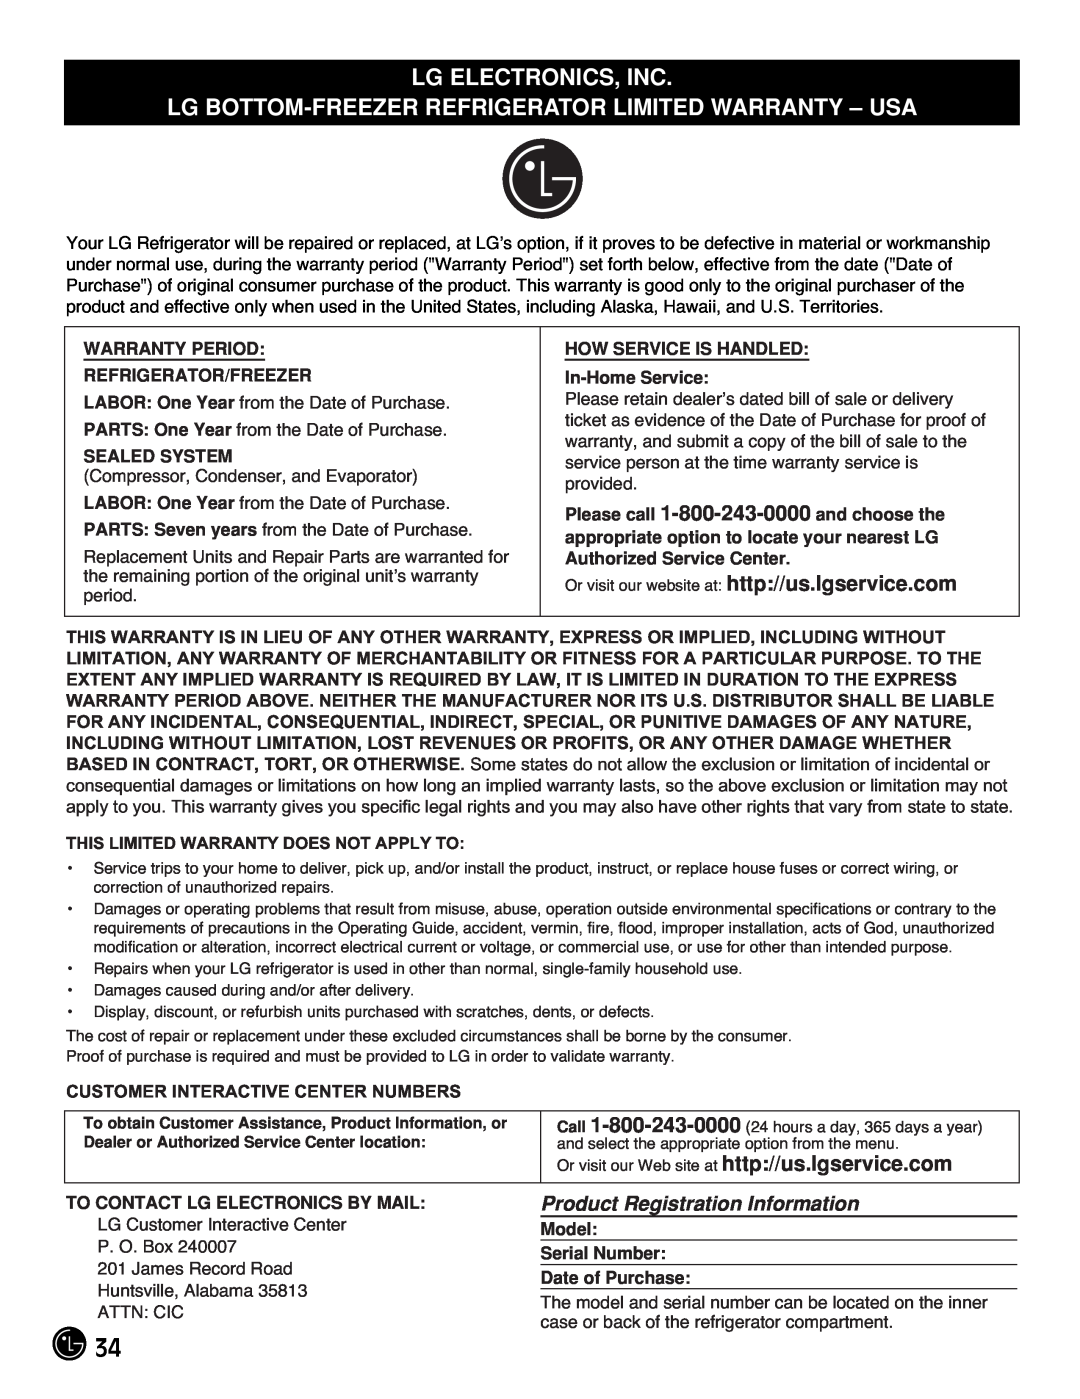 LG Electronics LFC21770 Lg Electronics, Inc, Product Registration Information, This Limited Warranty Does Not Apply To 